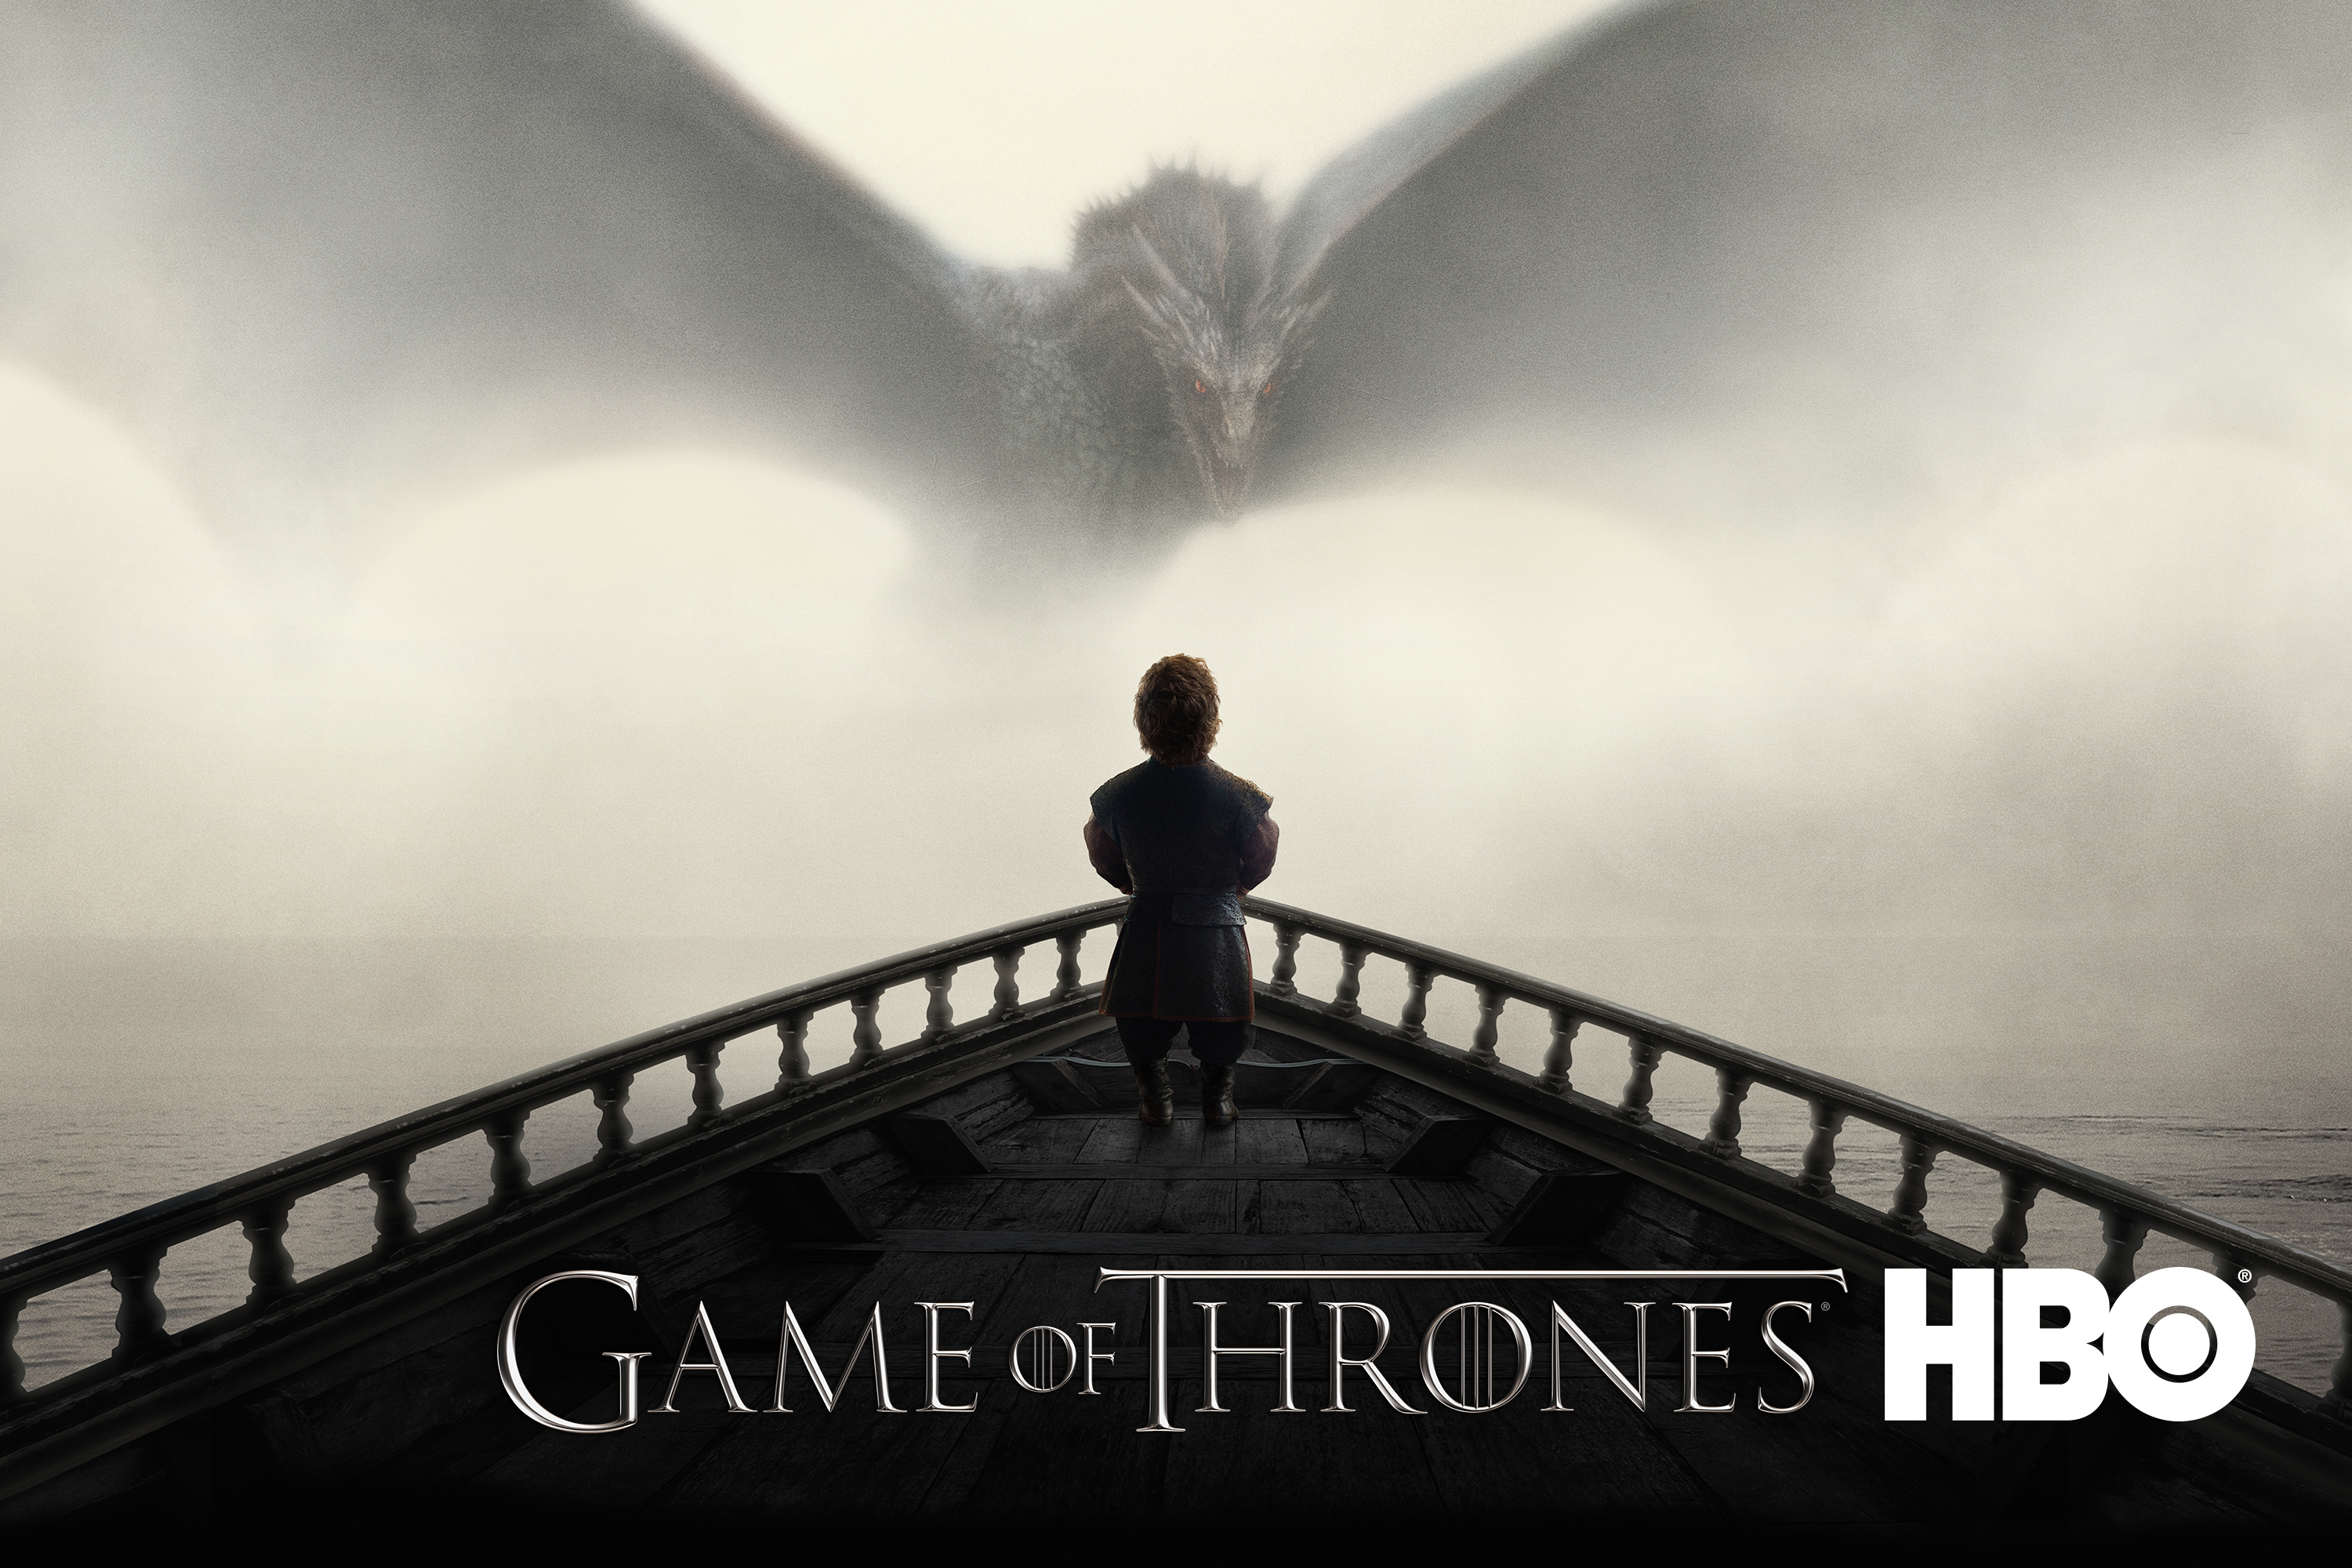 Tyrion Lannister - Game Of Thrones Season 5 - HD Wallpaper 